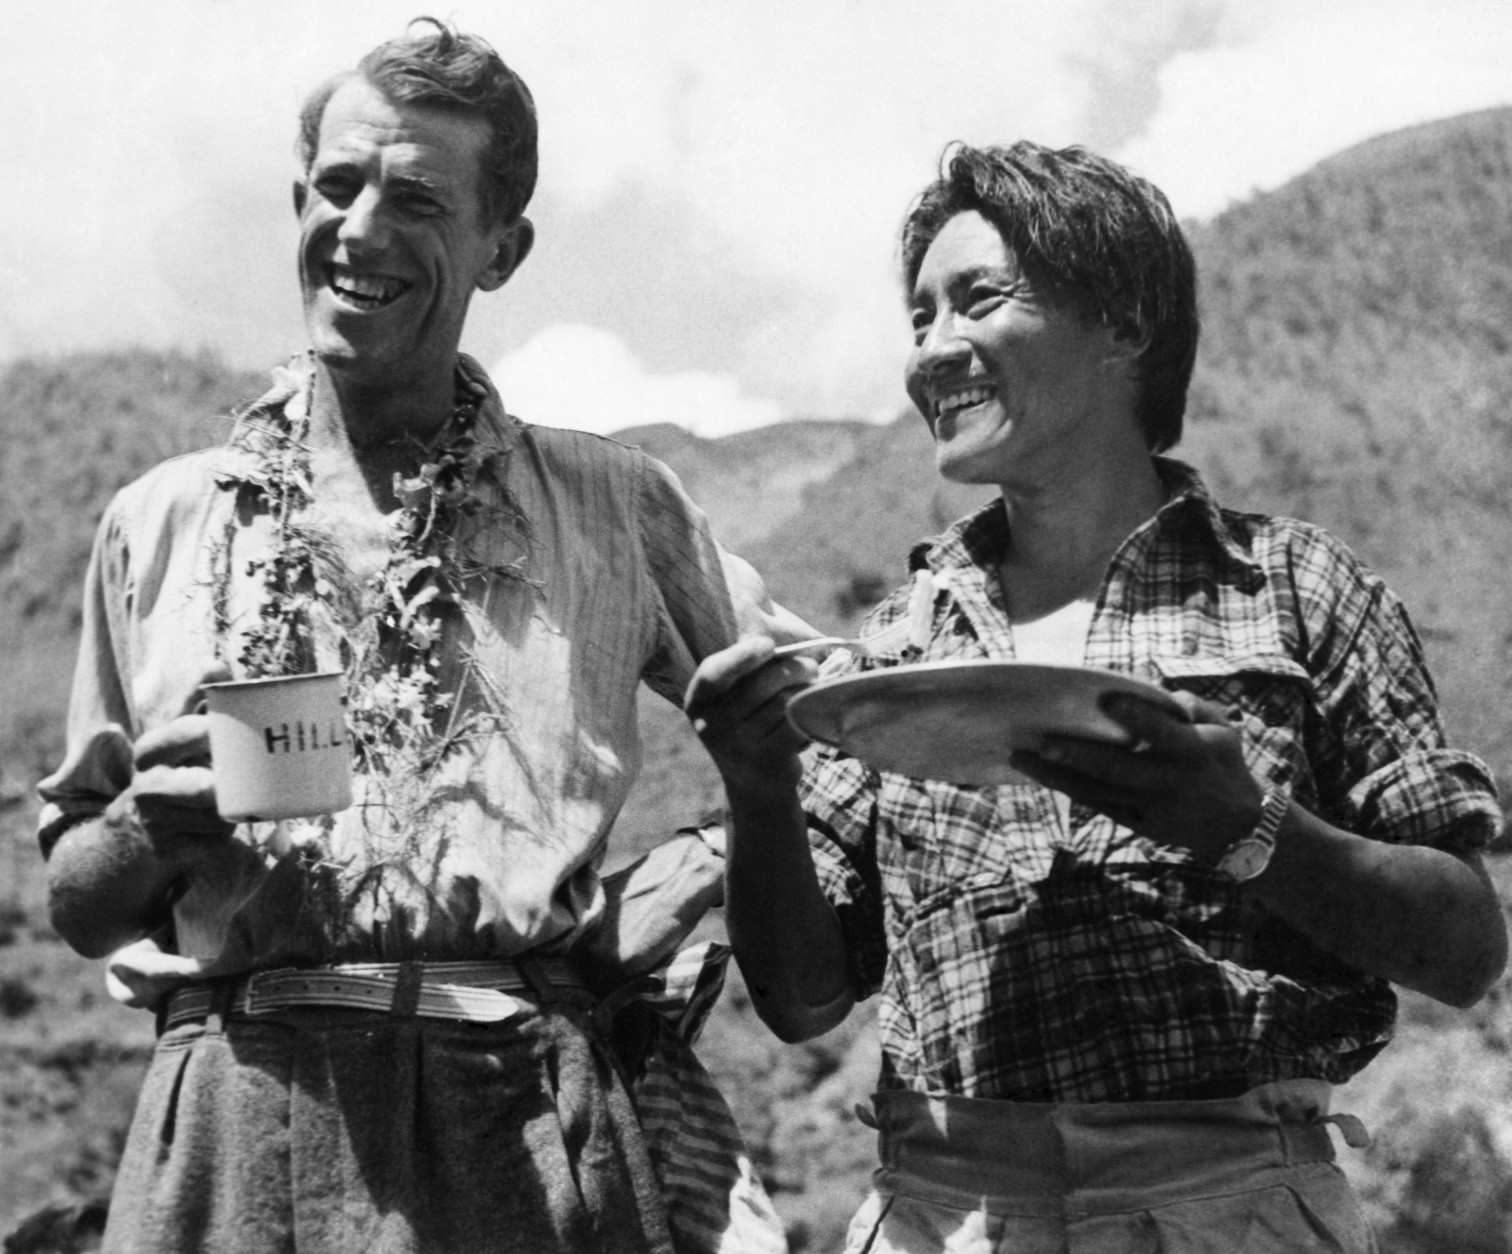 Edmund Hillary and Sherpa Tenzing Norgay smile as they breakfast in Kathmandu, Nepal after a 170 mile trek from their conquest of Mount Everest on June 20, 1953. (AP Photo)